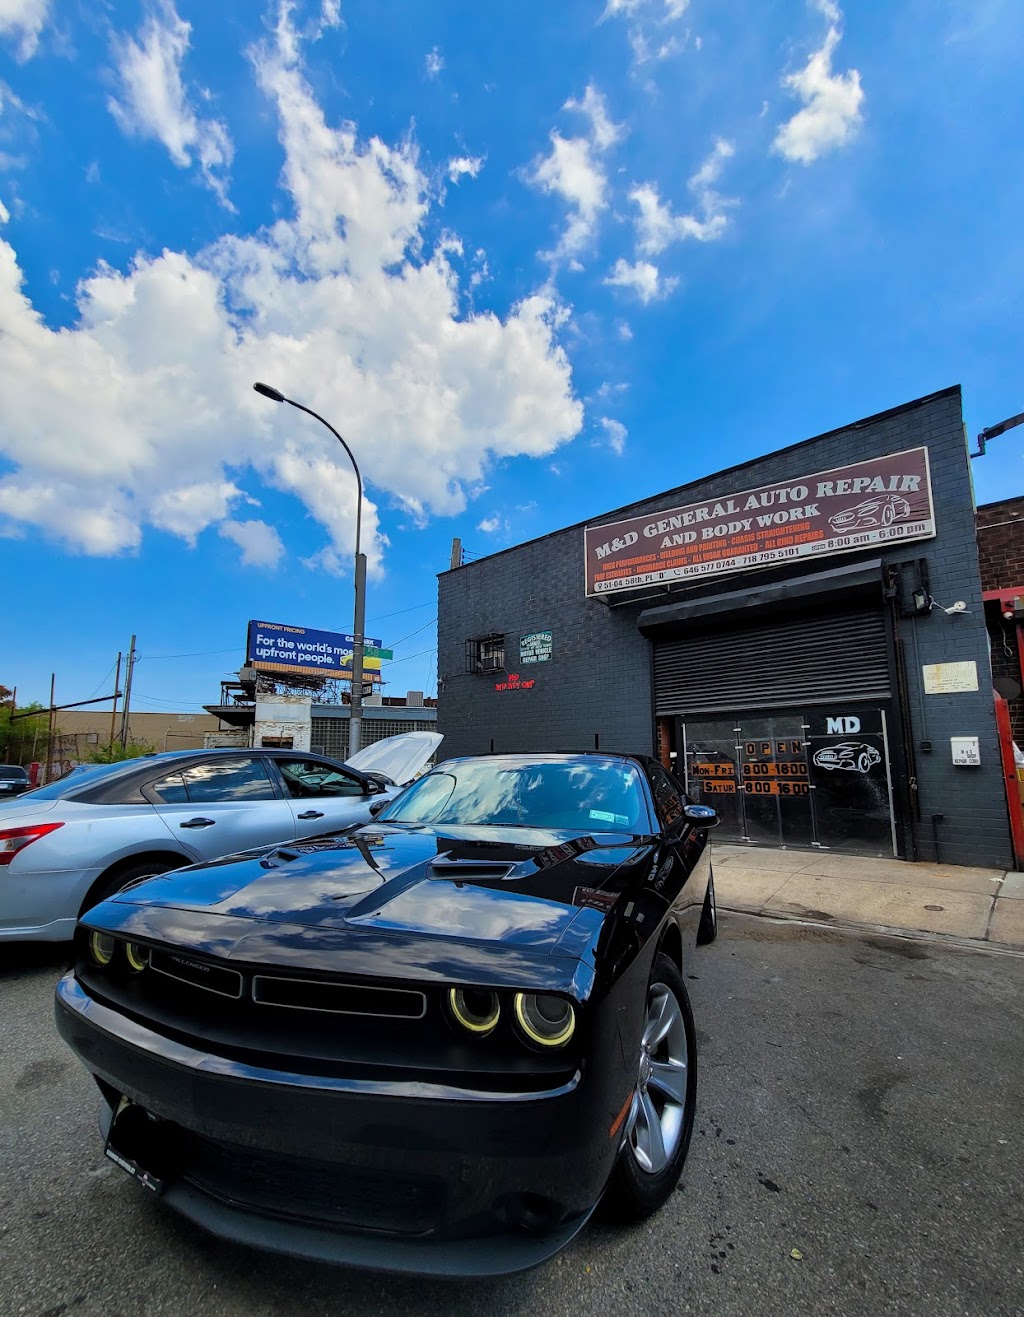 MD Auto Body Shop Repair | 51-04 58th Pl, Queens, NY 11377 | Phone: (646) 577-0744